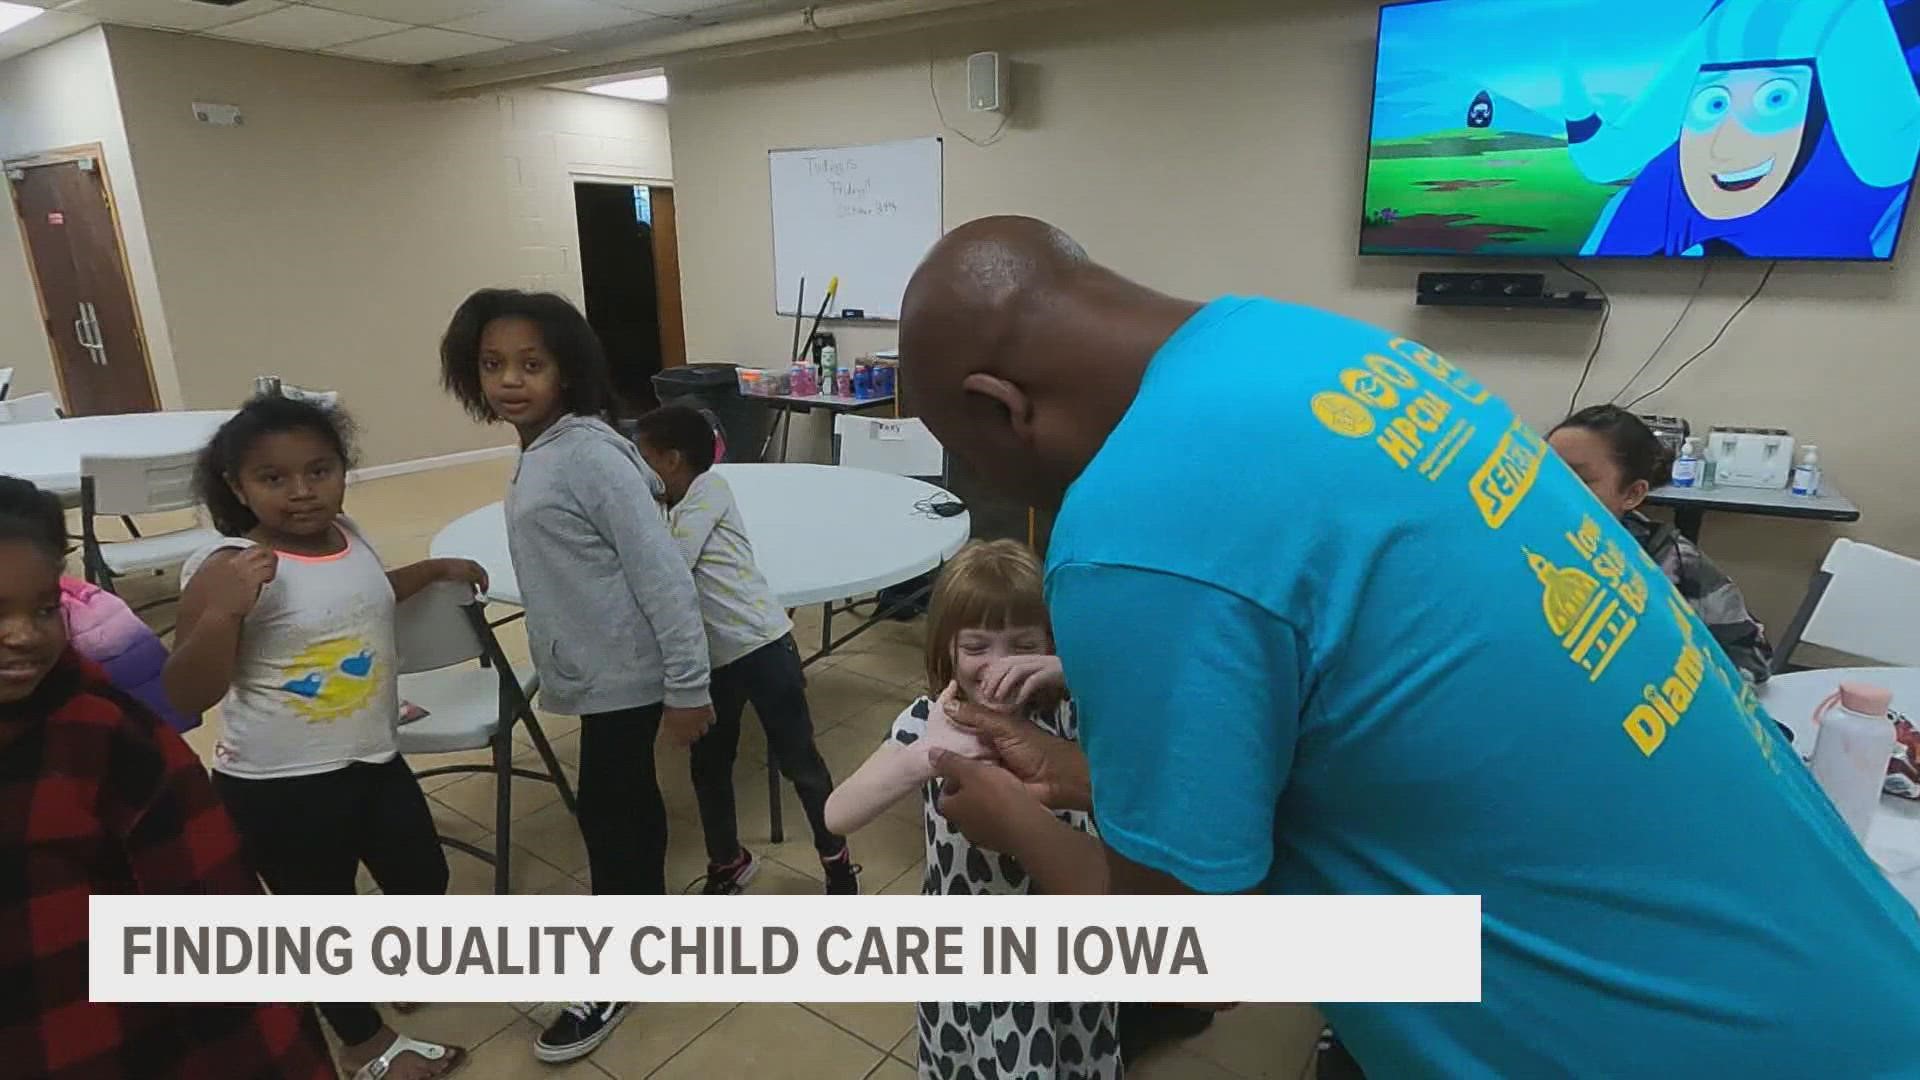 Iowa parents are in need of childcare. Grants given by D-H-S, and the Childcare Challenge Award are helping birth new facilities across the state of Iowa.